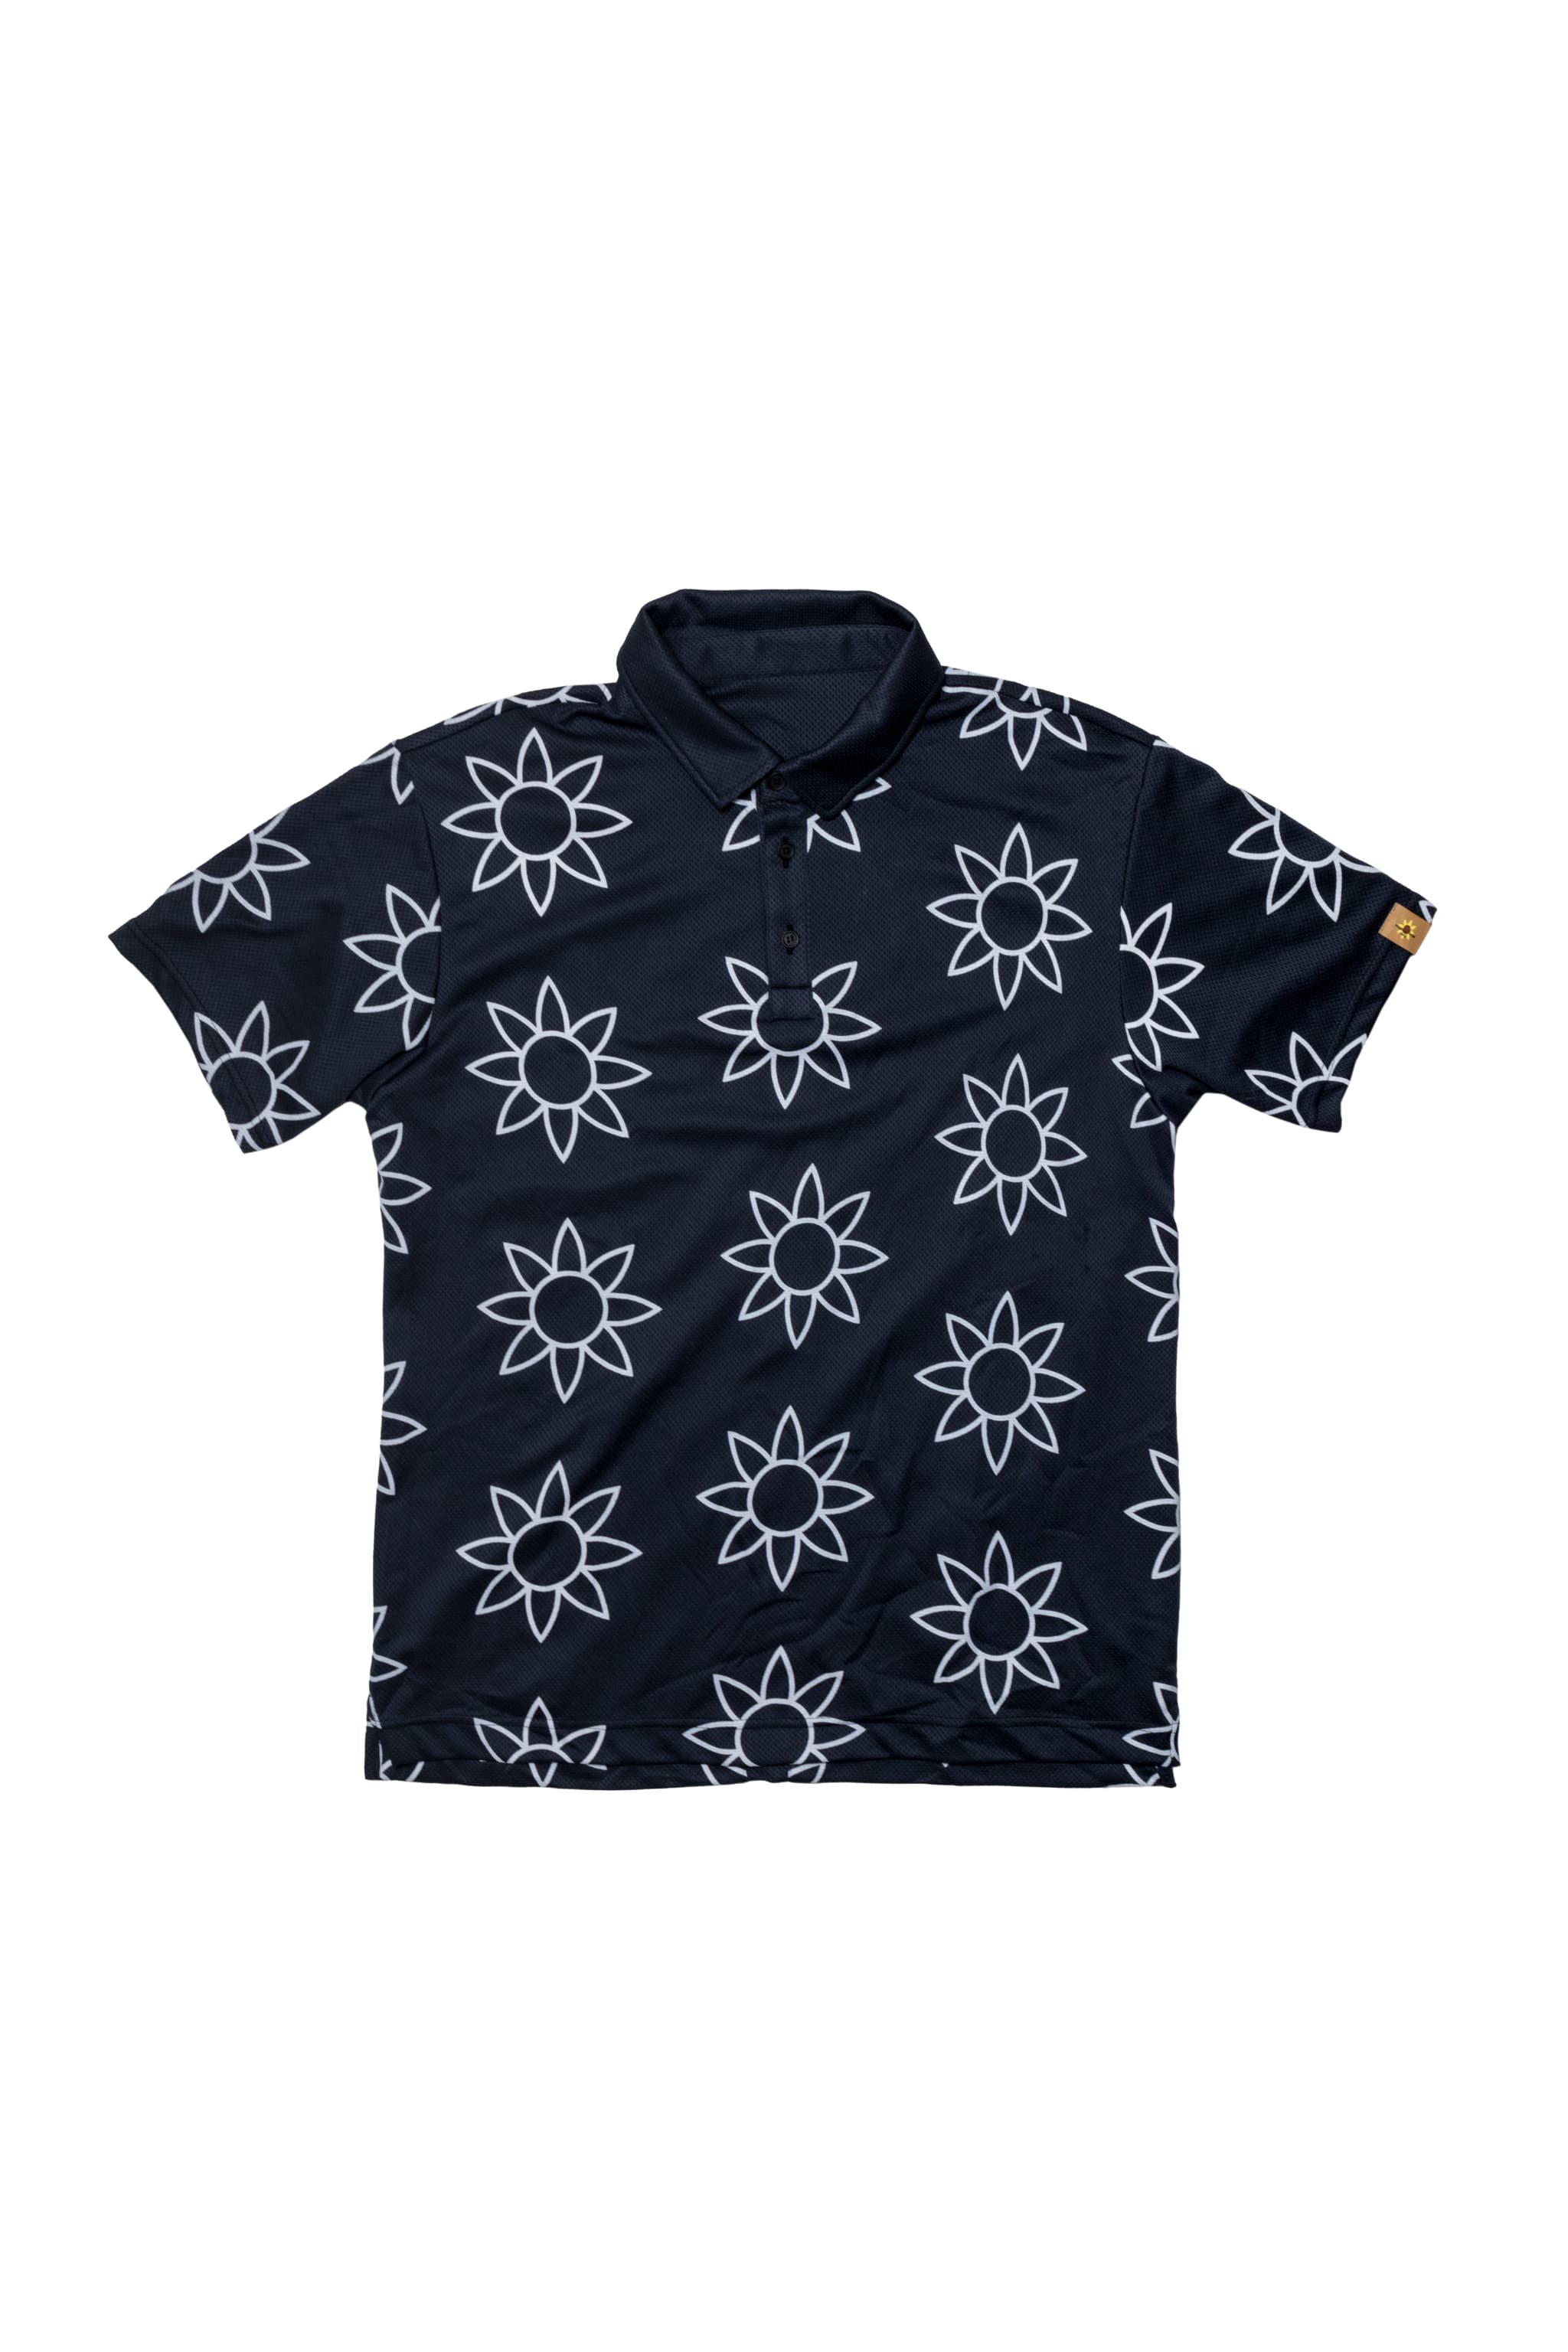 <img class='new_mark_img1' src='https://img.shop-pro.jp/img/new/icons50.gif' style='border:none;display:inline;margin:0px;padding:0px;width:auto;' />MESH POLO<br />black